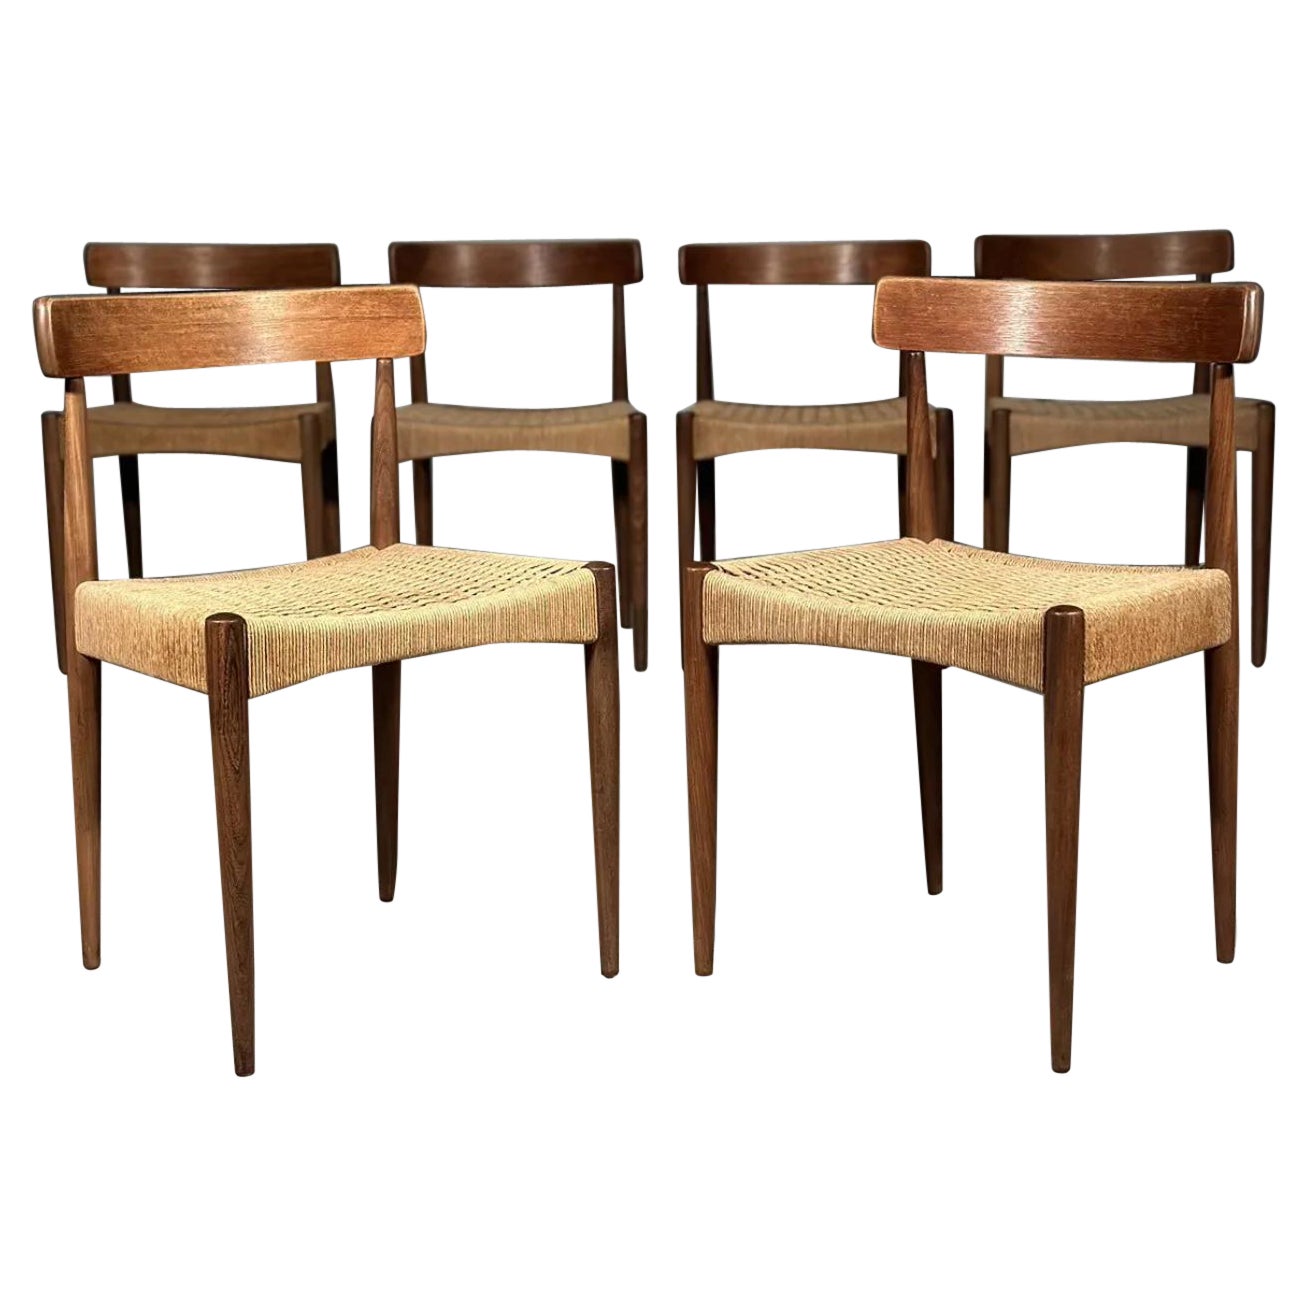 Set of 6 Danish Teak And Paper Cord Dining Chairs Designed By Arne Hovmand Olsen For Sale